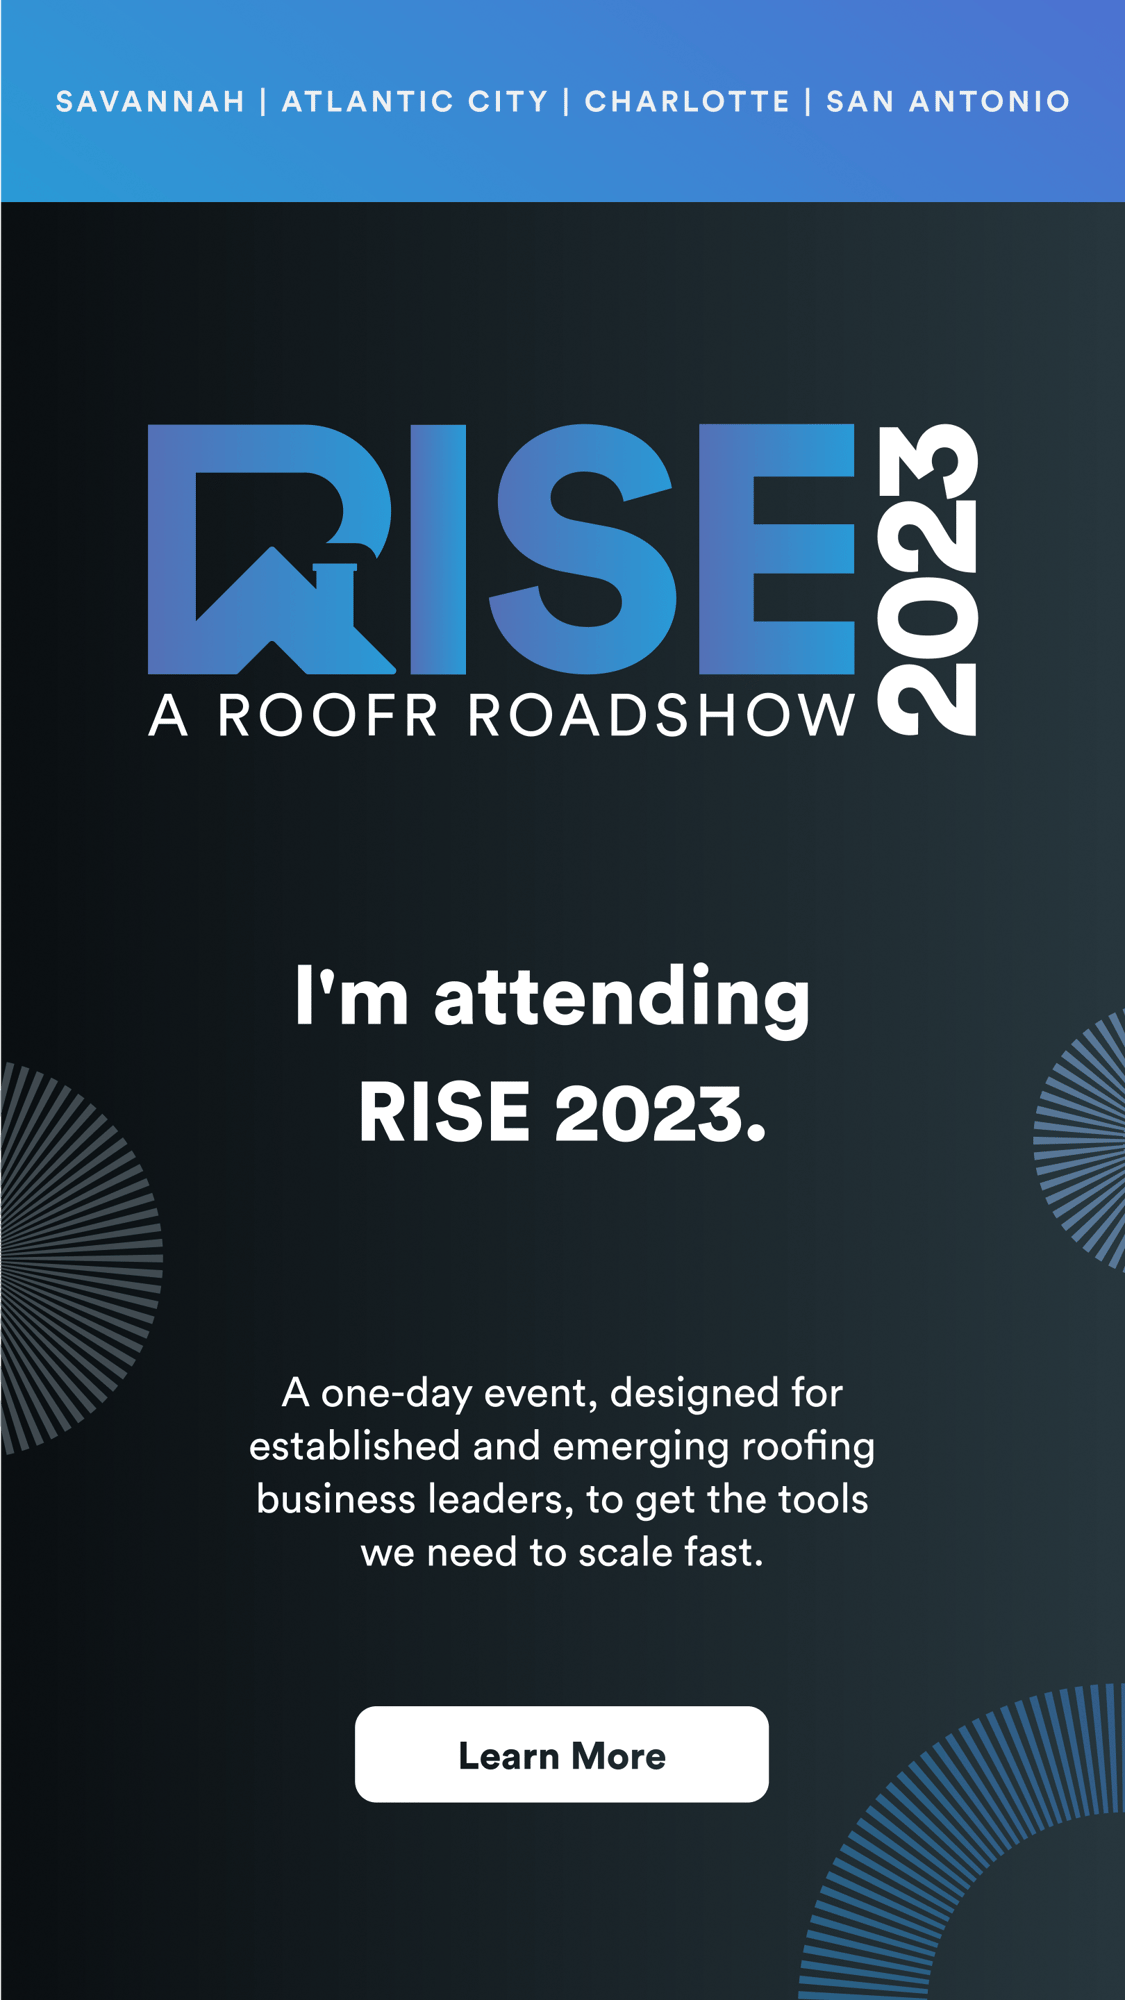 RISE2023-IGS&TK-Social-Share-Attendees-1